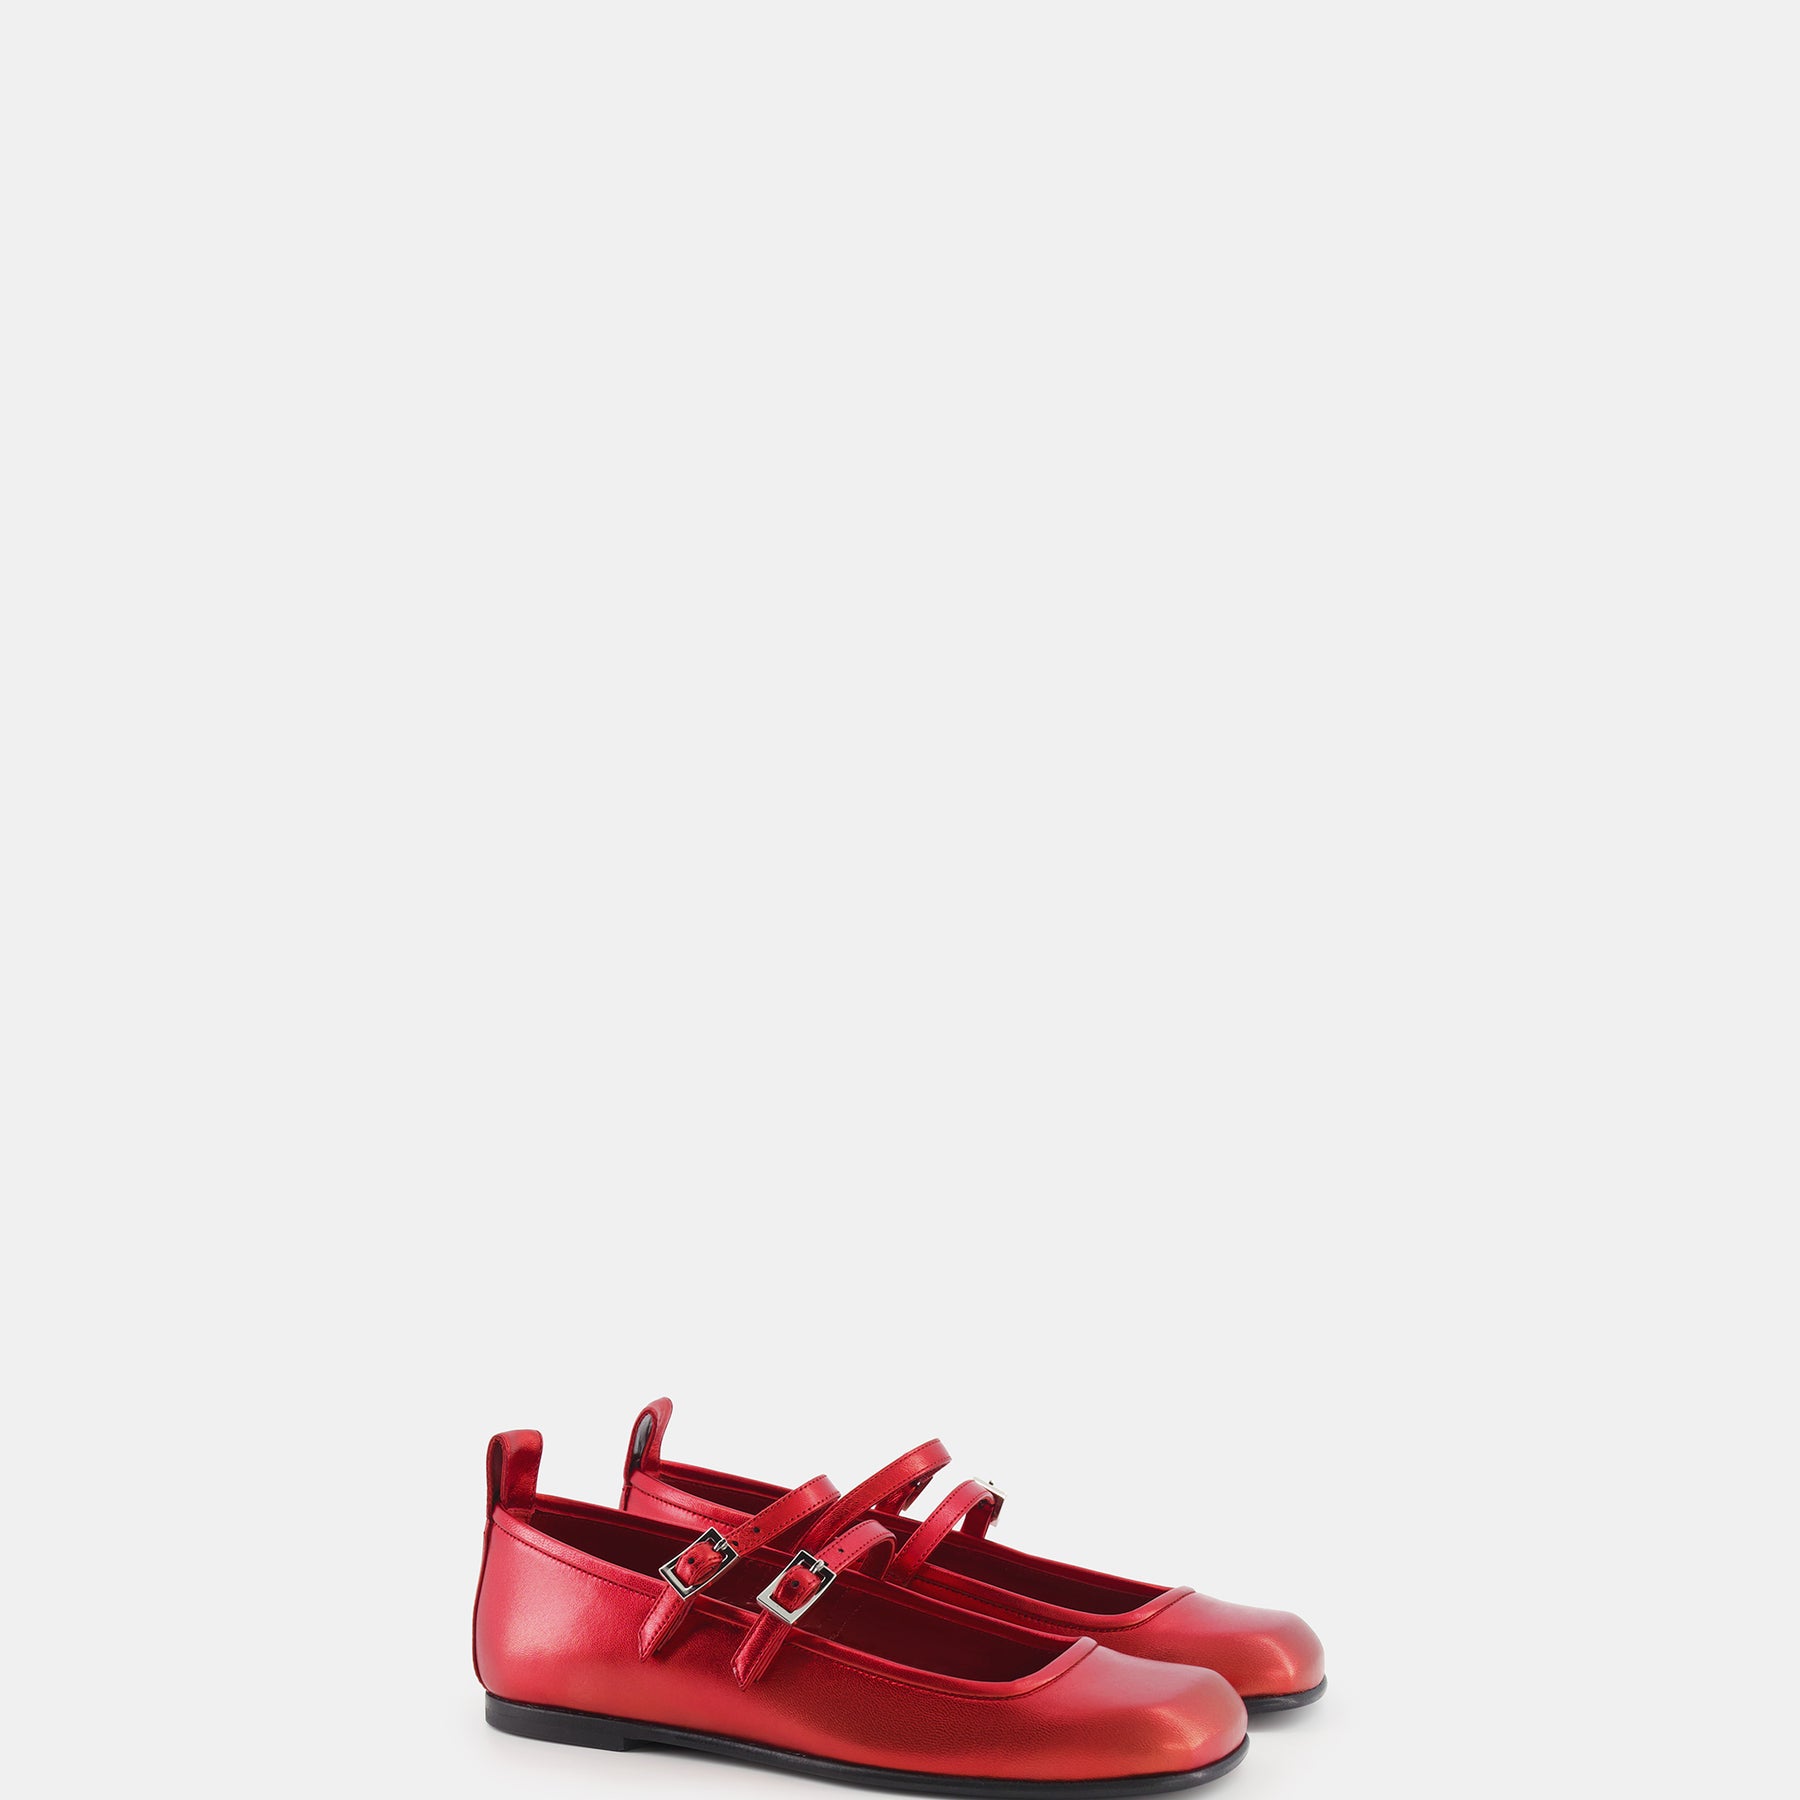 ballerina-red-leather-mary-jane-womens-shoes